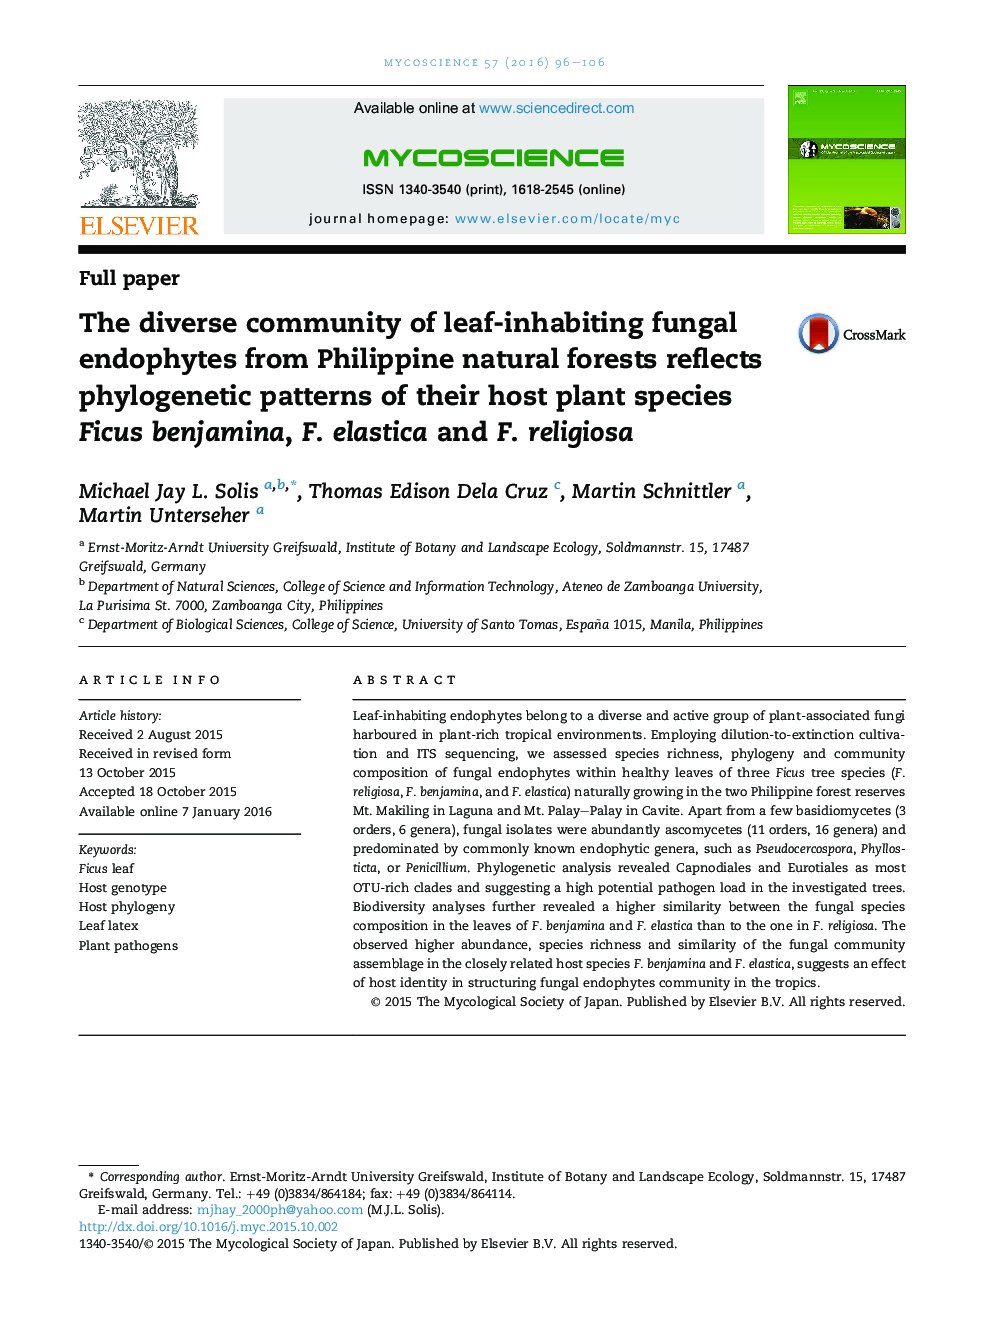 The diverse community of leaf-inhabiting fungal endophytes from Philippine natural forests reflects phylogenetic patterns of their host plant species Ficus benjamina, F. elastica and F. religiosa